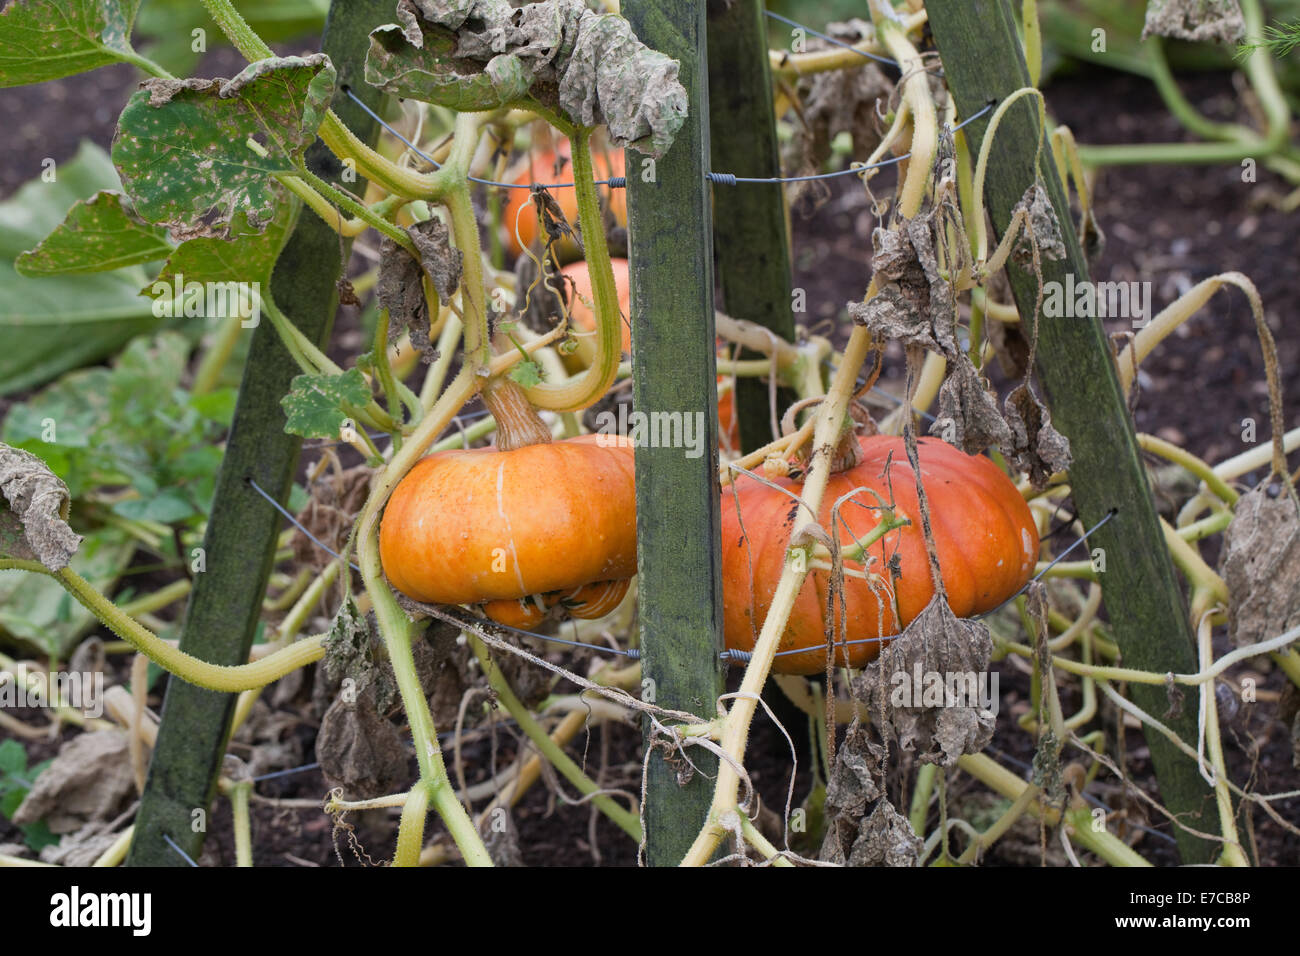 Turk's Turban Pumpkin, Gourd or Squash (Cucurbita maxima). Cultivated ornamental fruits, or 'vegetables'. Growing over and suppo Stock Photo